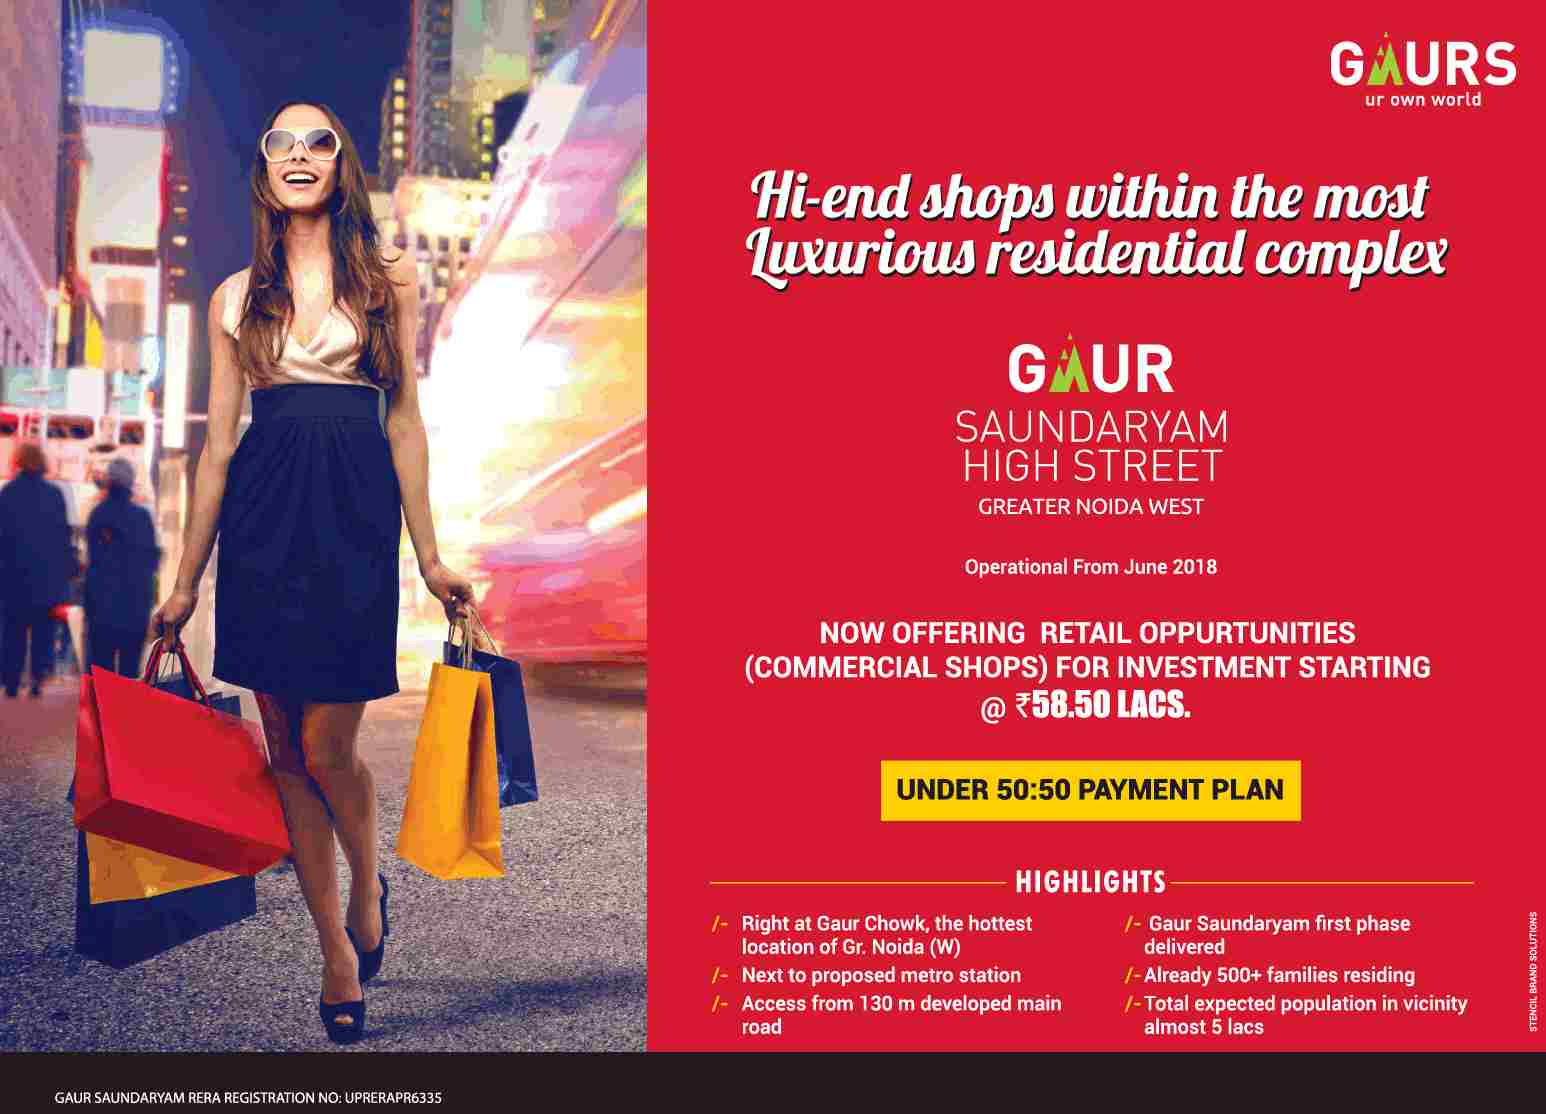 Experience hi-end shops within the most luxurious residential complex at Gaur Saundaryam High Street in Greater Noida